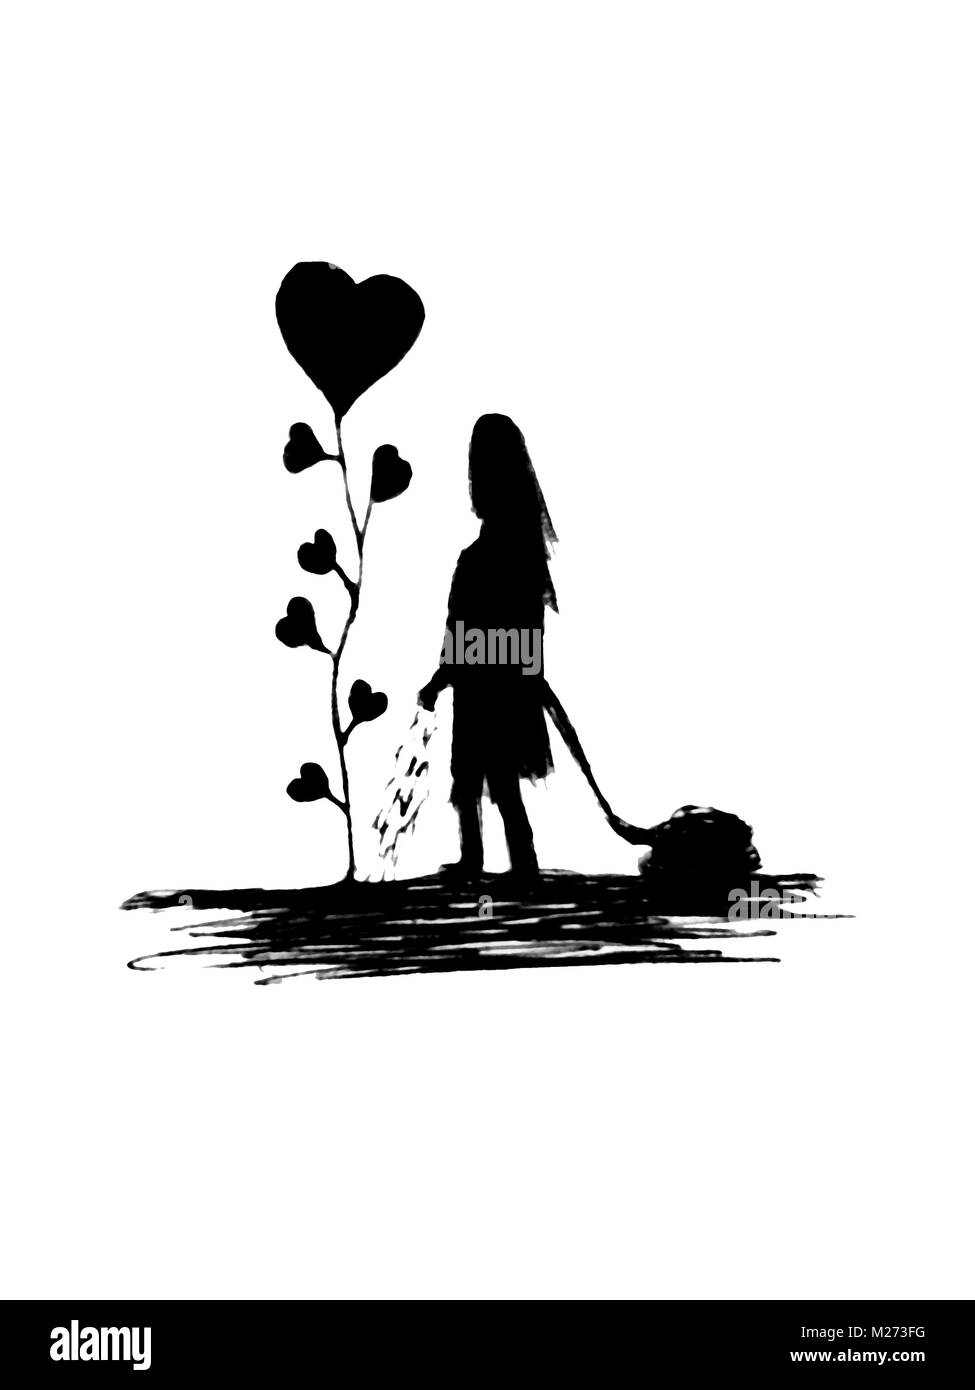 Love concept sketchy illustration showing a woman sowing a tree with heart leaves Stock Photo